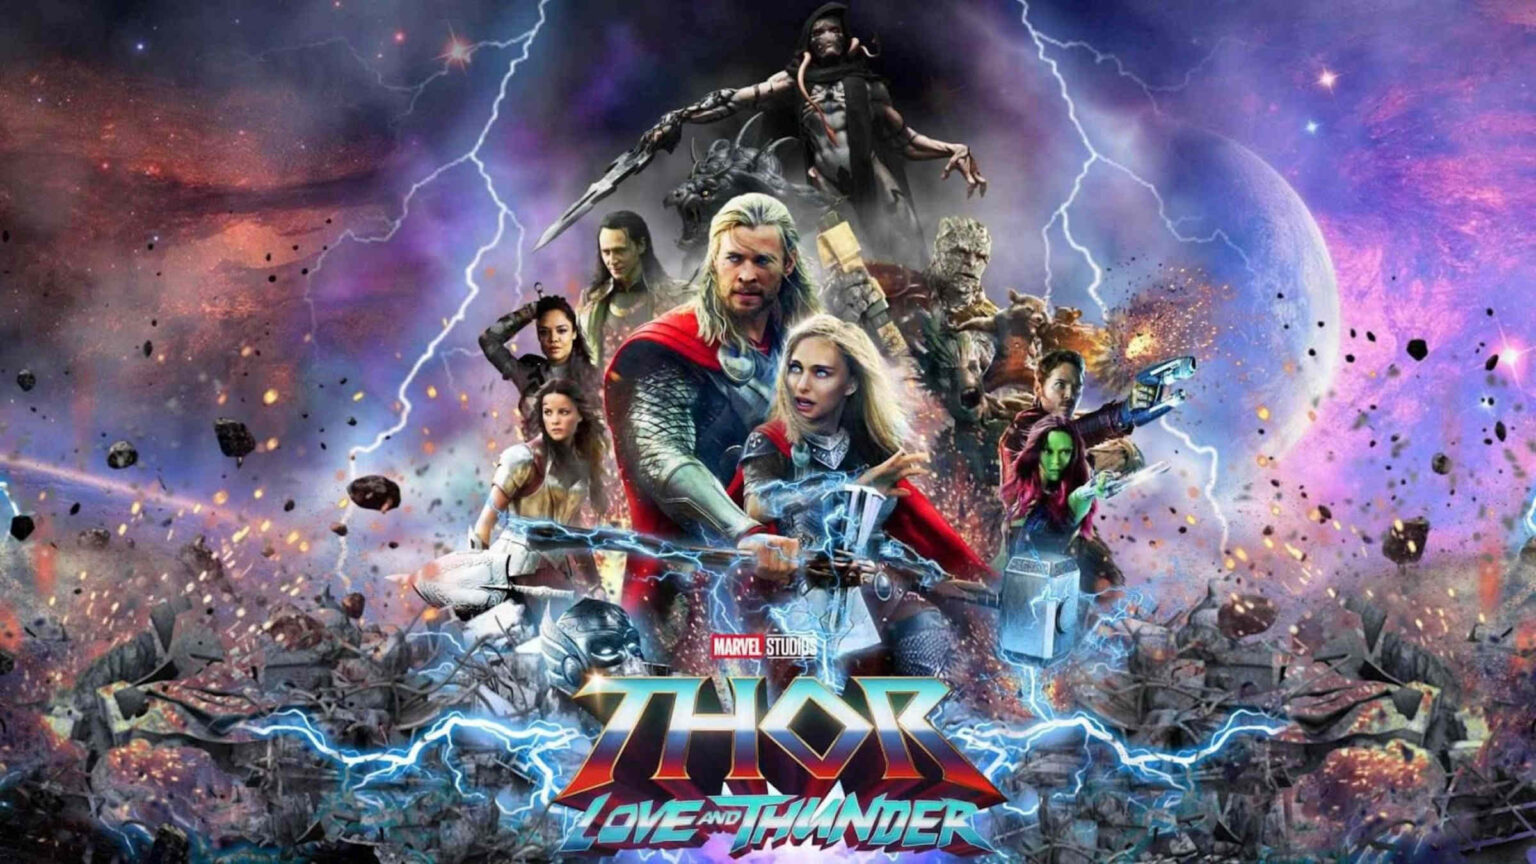 'Thor: Love and Thunder' is Finally here. Find out where to watch Thor: Love and Thunder online for free.